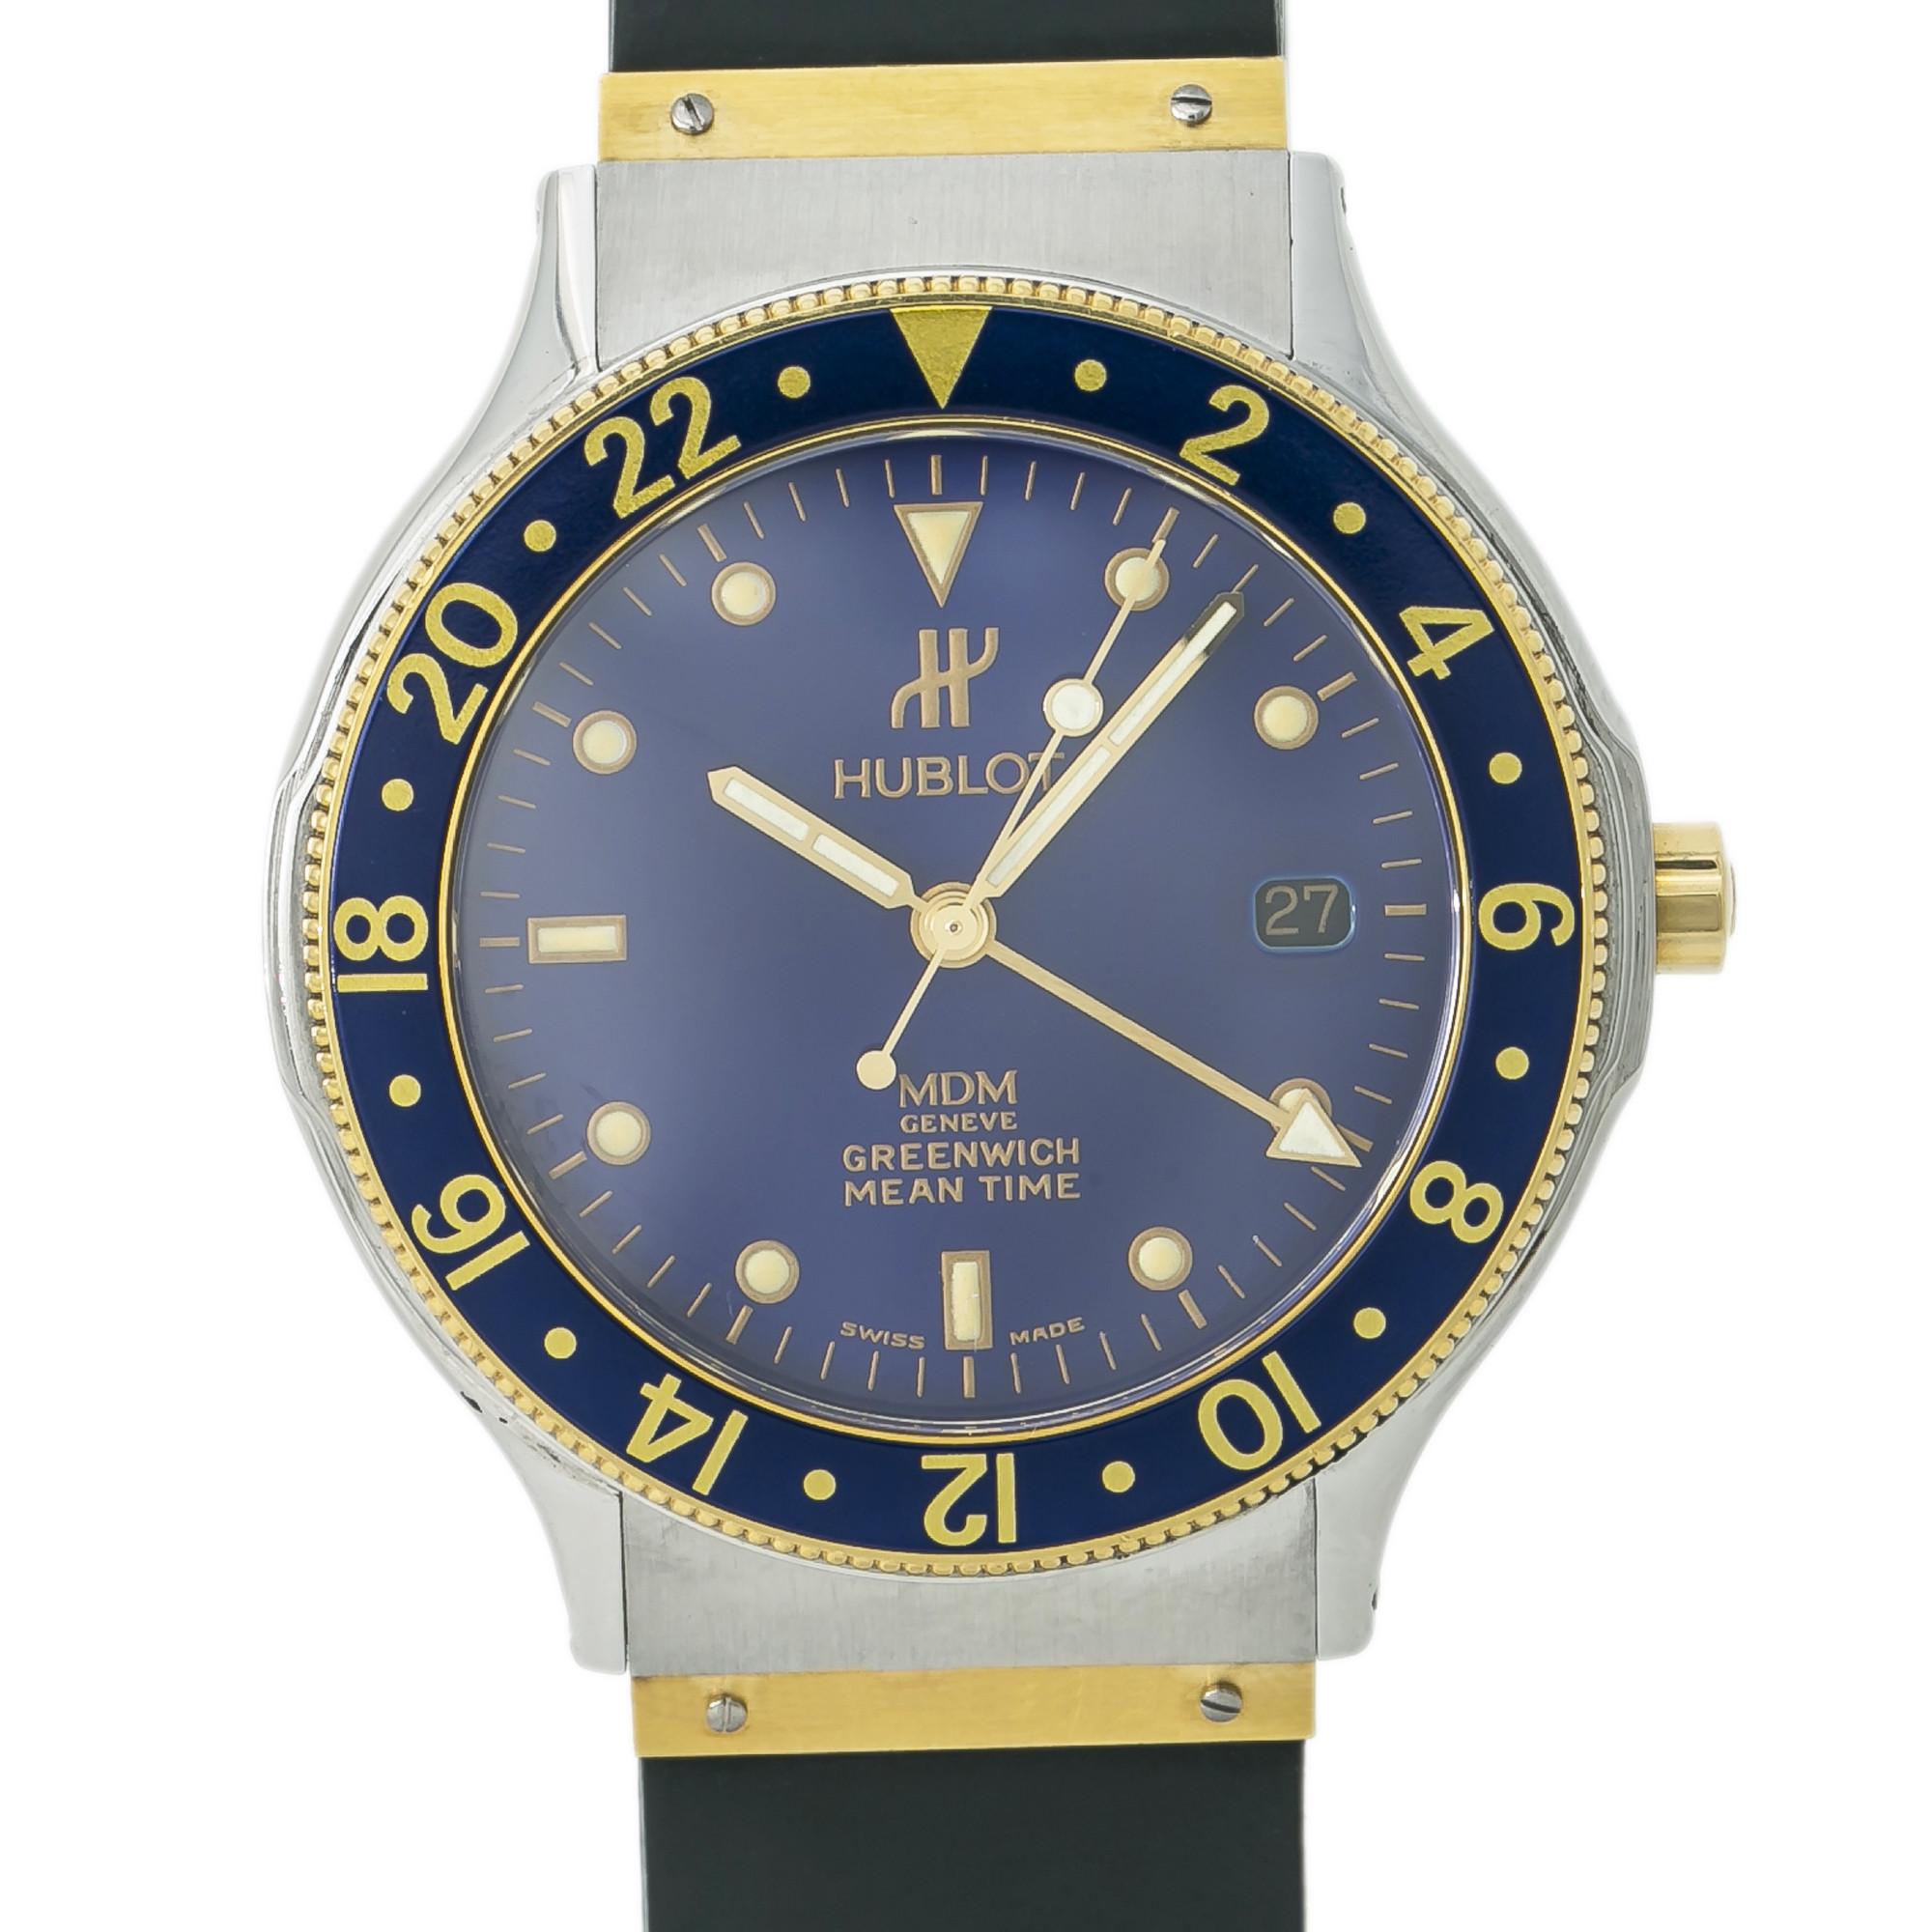 Contemporary Hublot MDM 1572.2, Blue Dial, Certified and Warranty